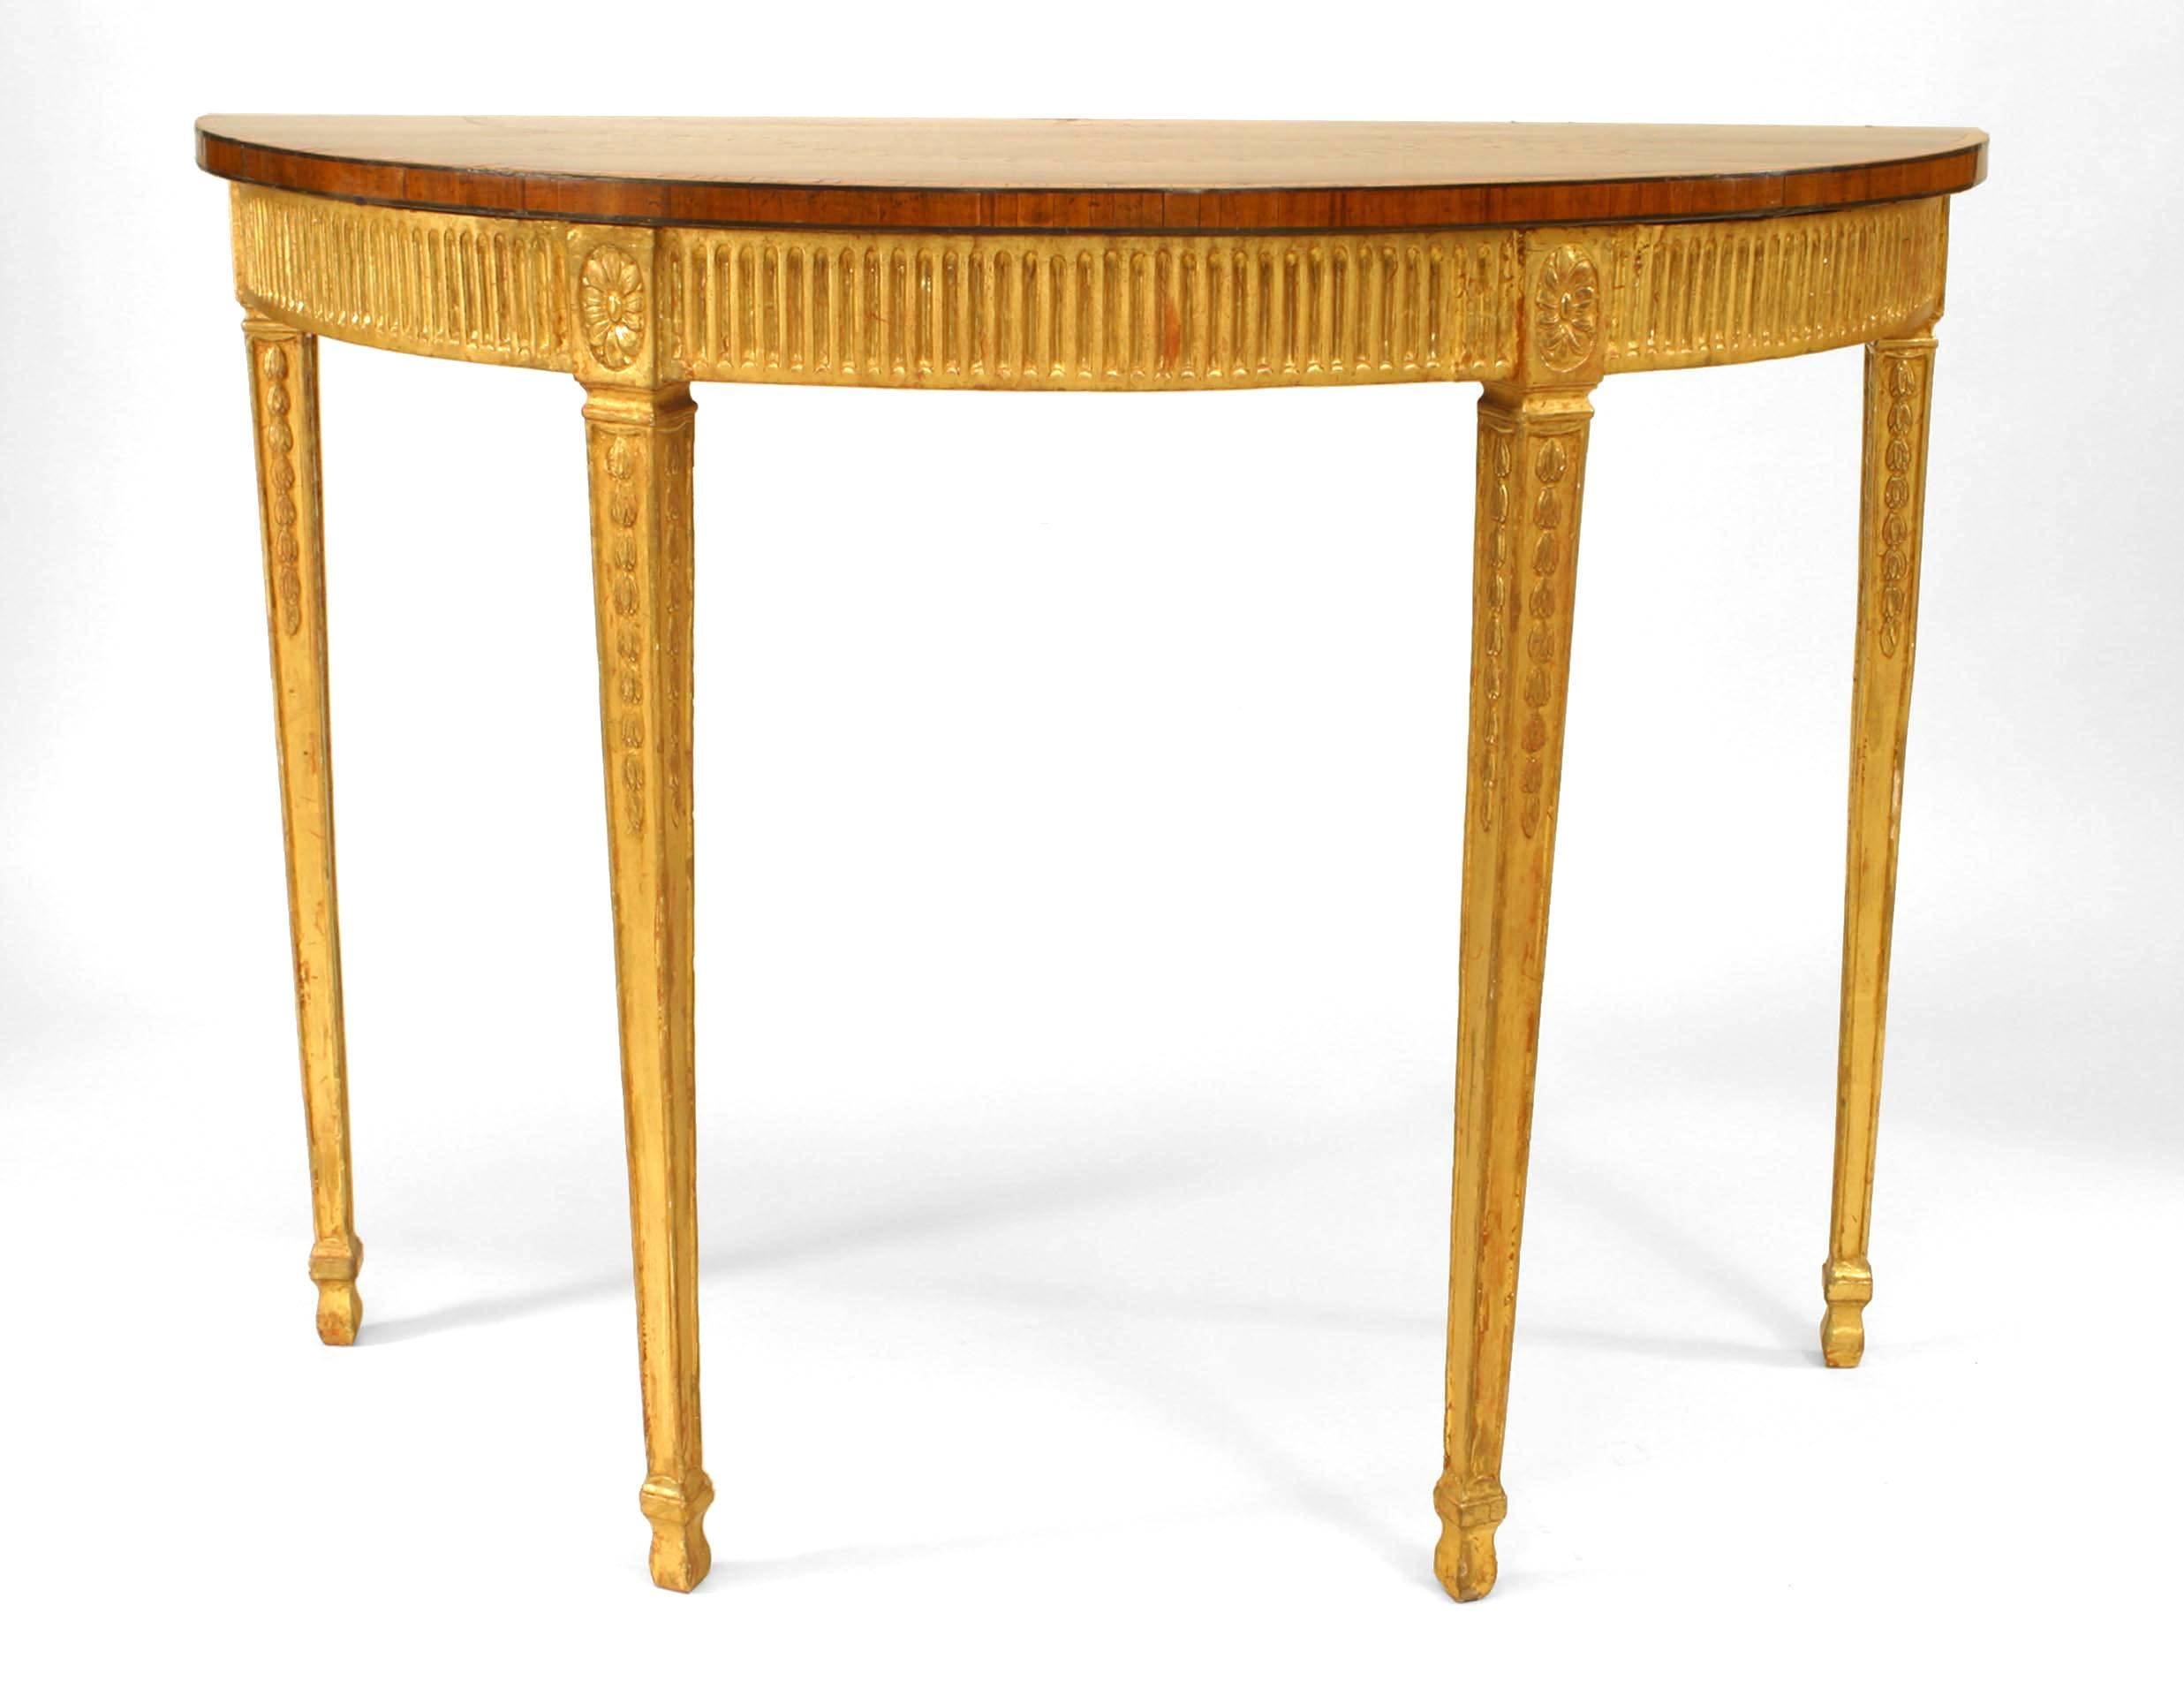 English Adam-style (18/19th Century) gilt half round console table with fluted design apron with a satinwood and various wood inlaid top.
